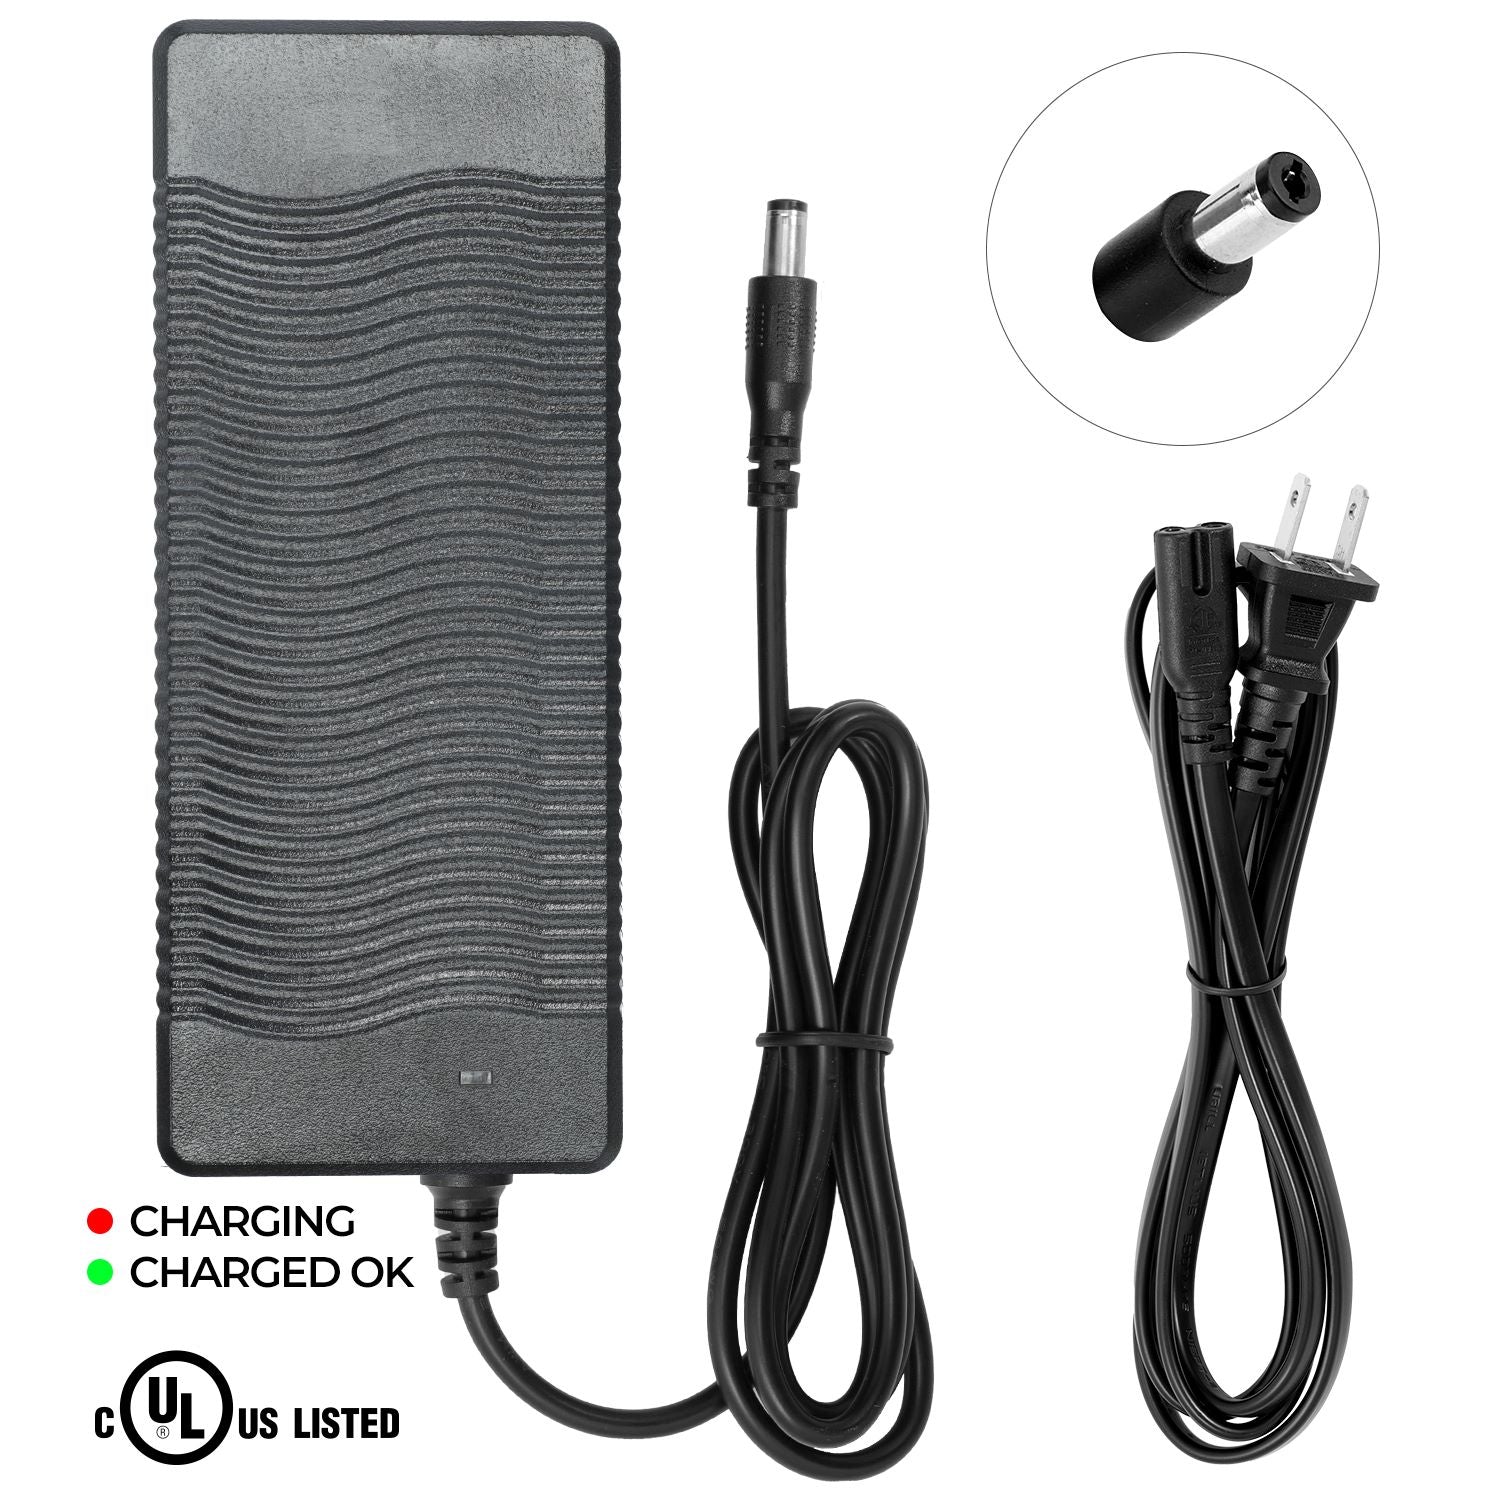 UL Listed Charger for TotGuard Electric Bike (Please Choose the Correct Variant Before Ordering)